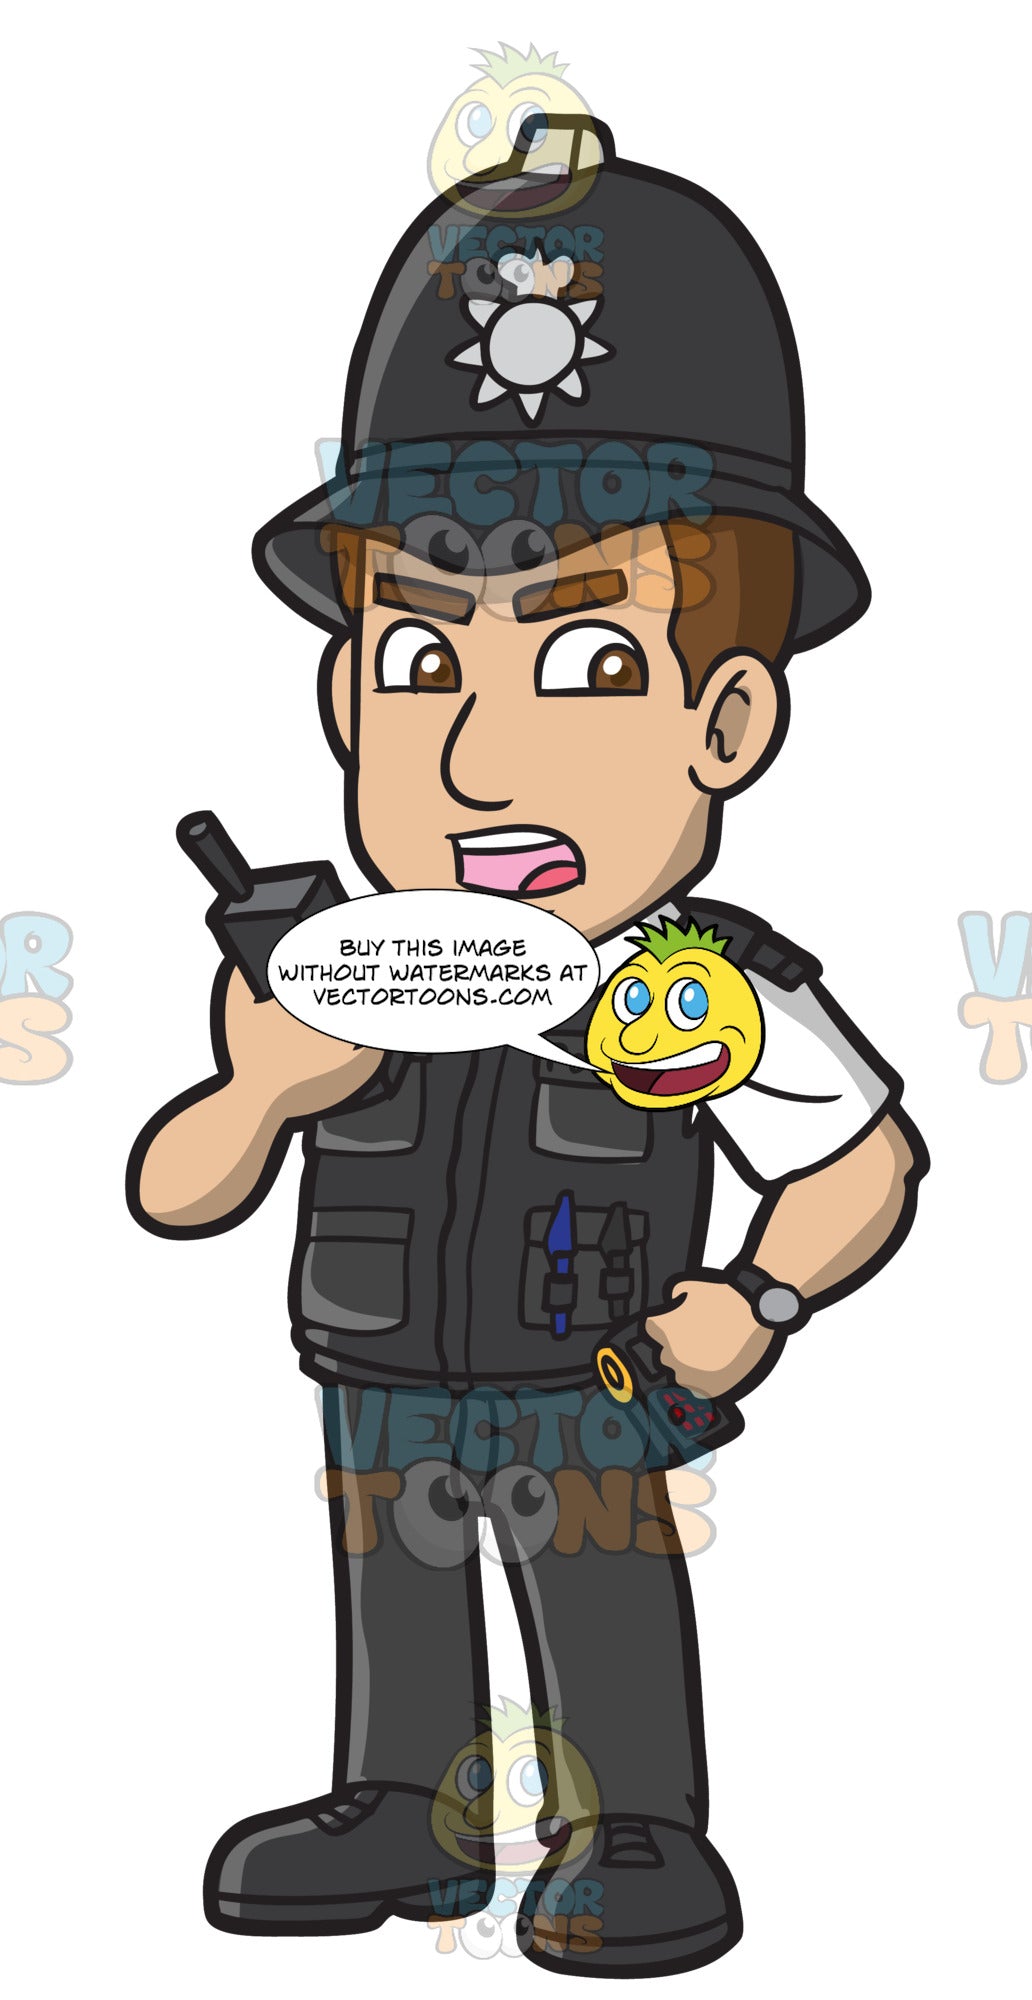 A British Police Constable – Clipart Cartoons By VectorToons